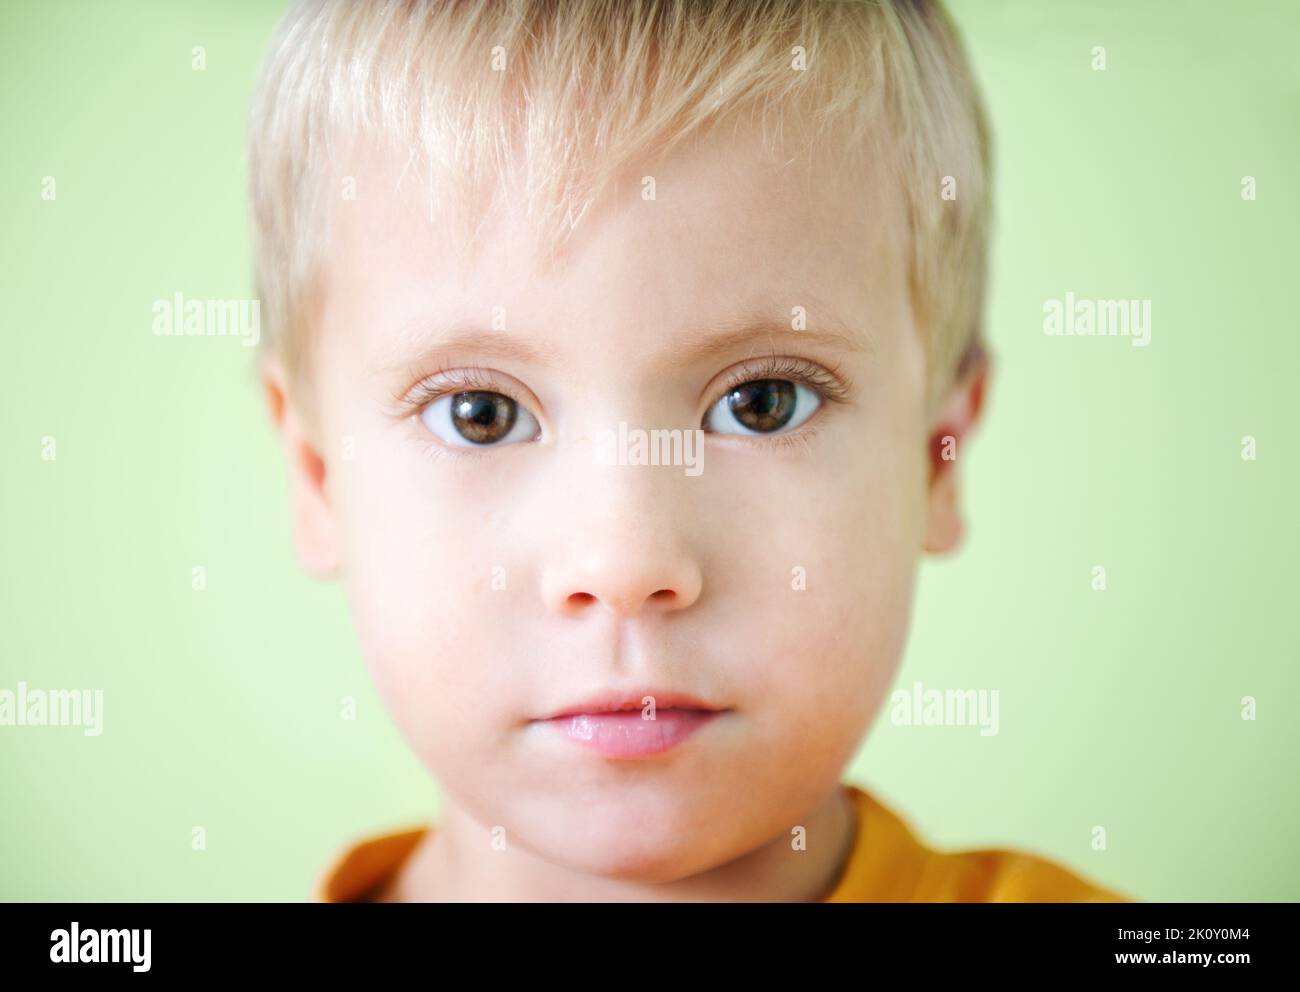 Serious cute little boy on a white background Stock Photo